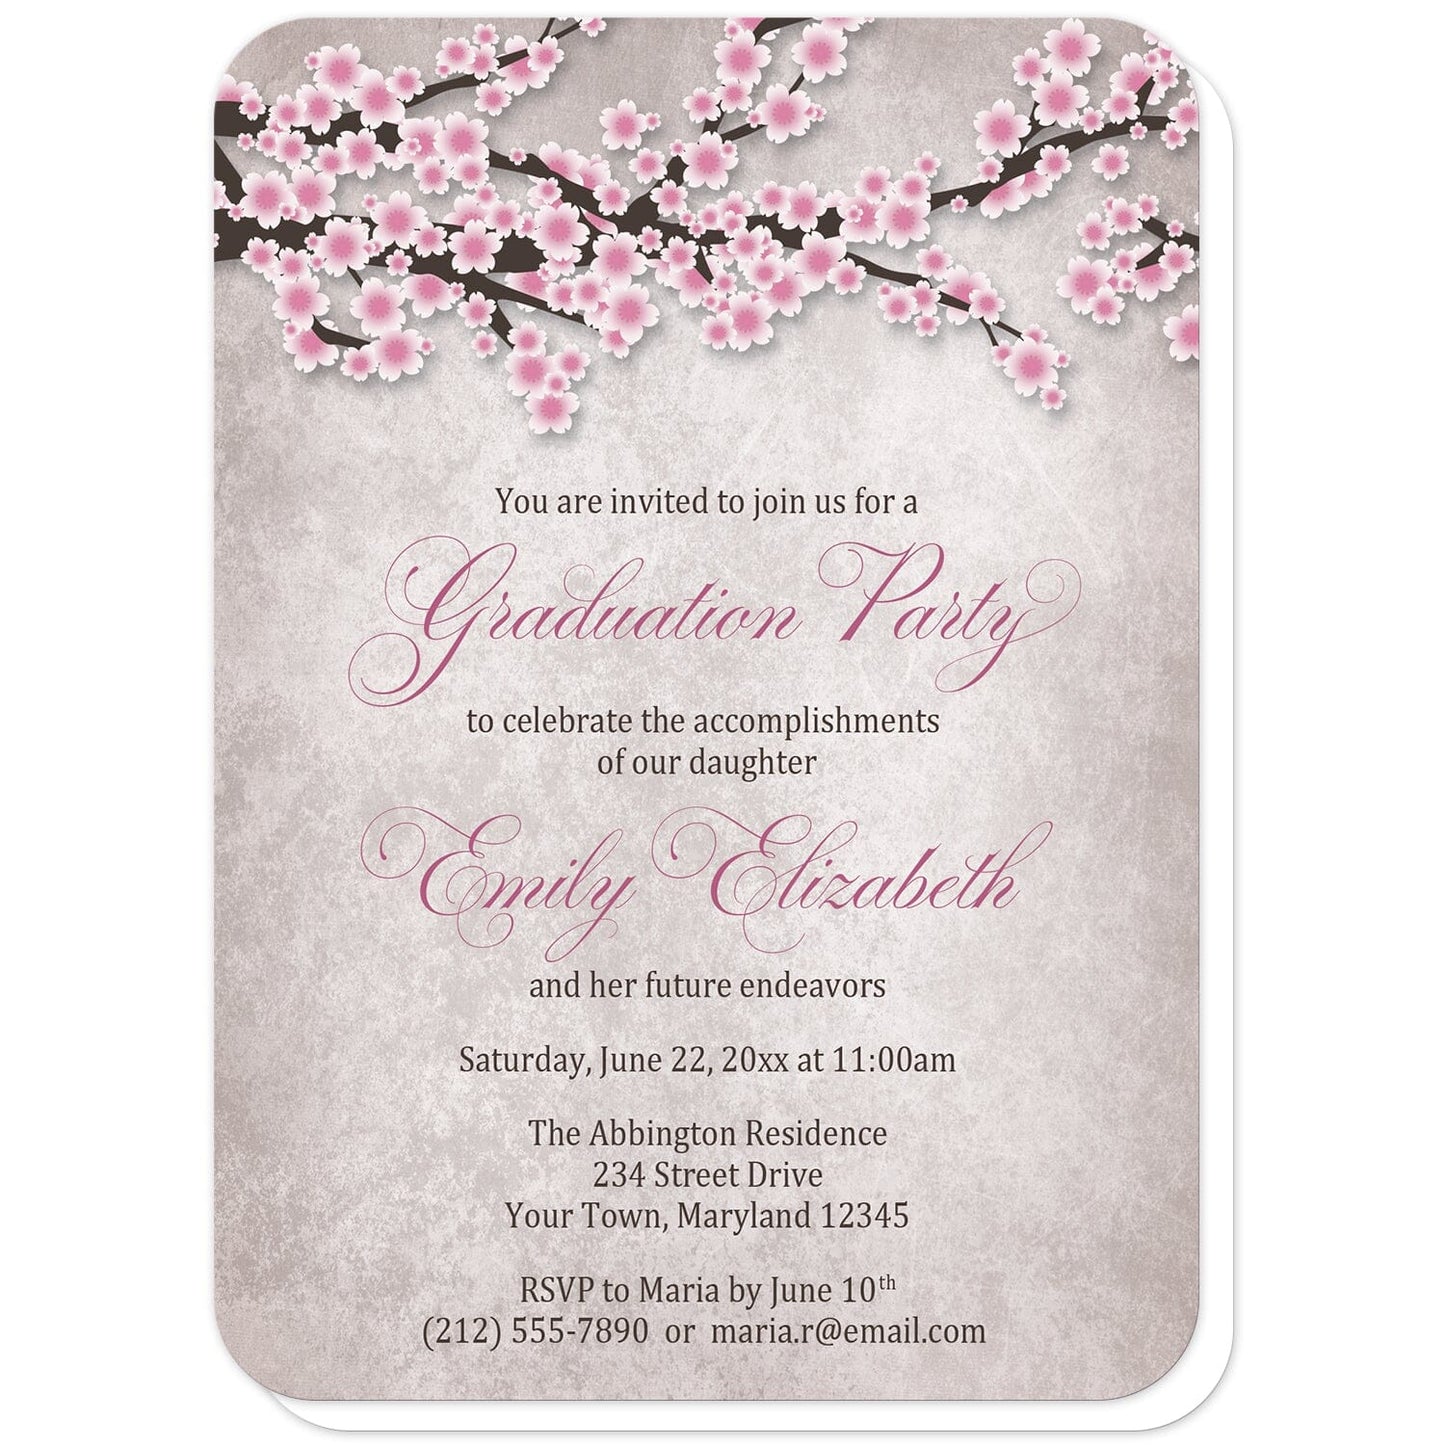 Rustic Pink Cherry Blossom Graduation Invitations (with rounded corners) at Artistically Invited. Rustic pink cherry blossom graduation invitations featuring an illustration of pink and white with dark brown cherry blossom branches along the top. Your personalized graduation party details are custom printed in pink and dark brown over a stony grayish brown background below the pretty cherry blossom branches. 